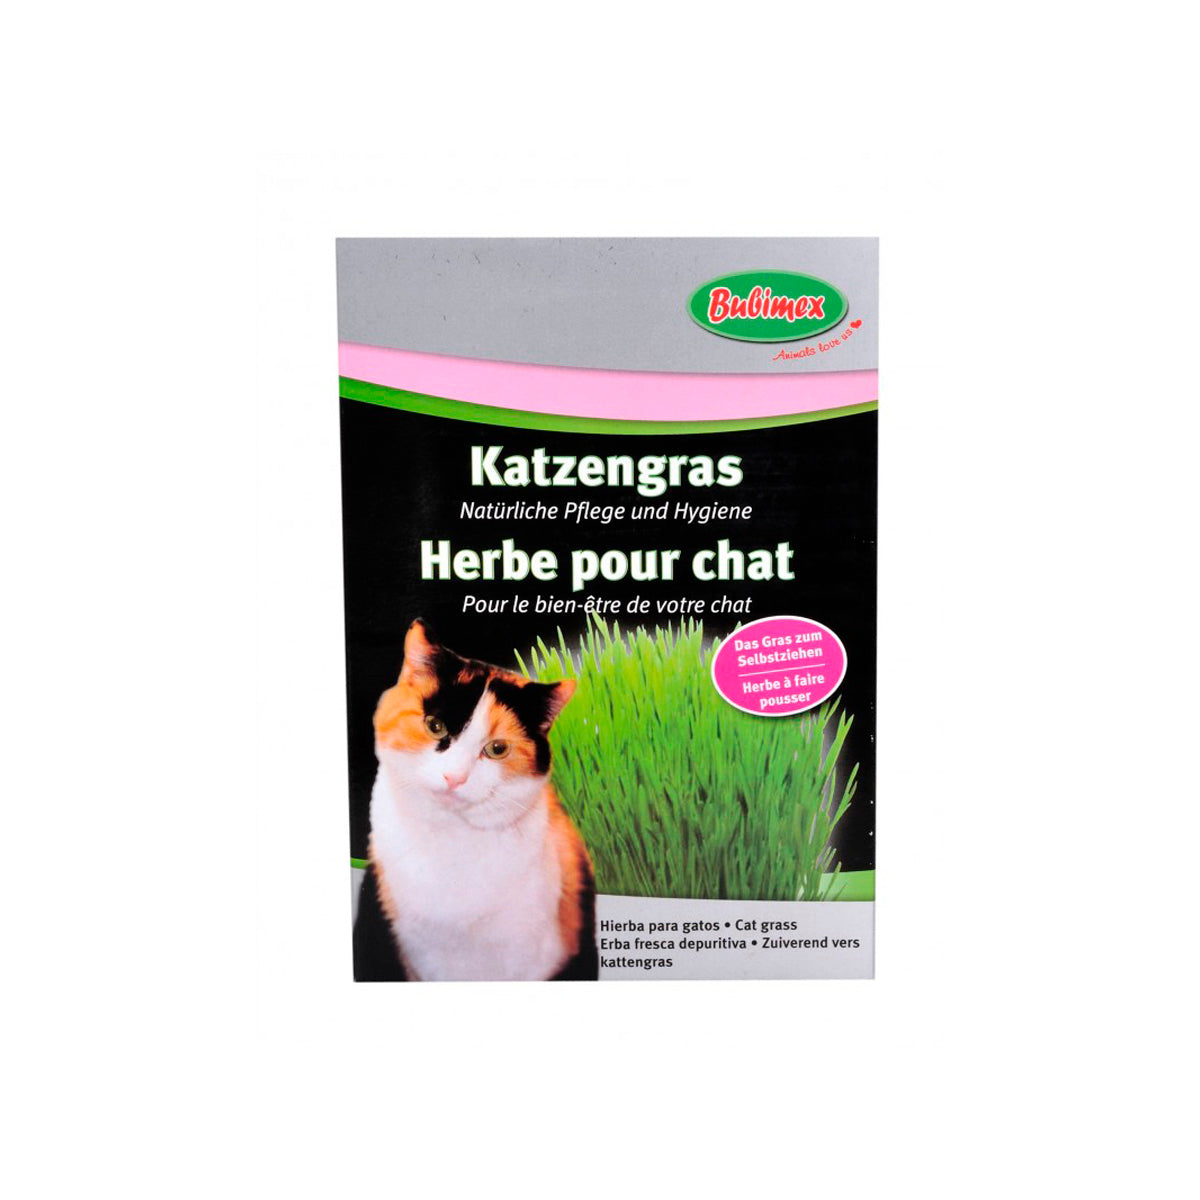 HERBE A CHAT 100 G (BUBIMEX)